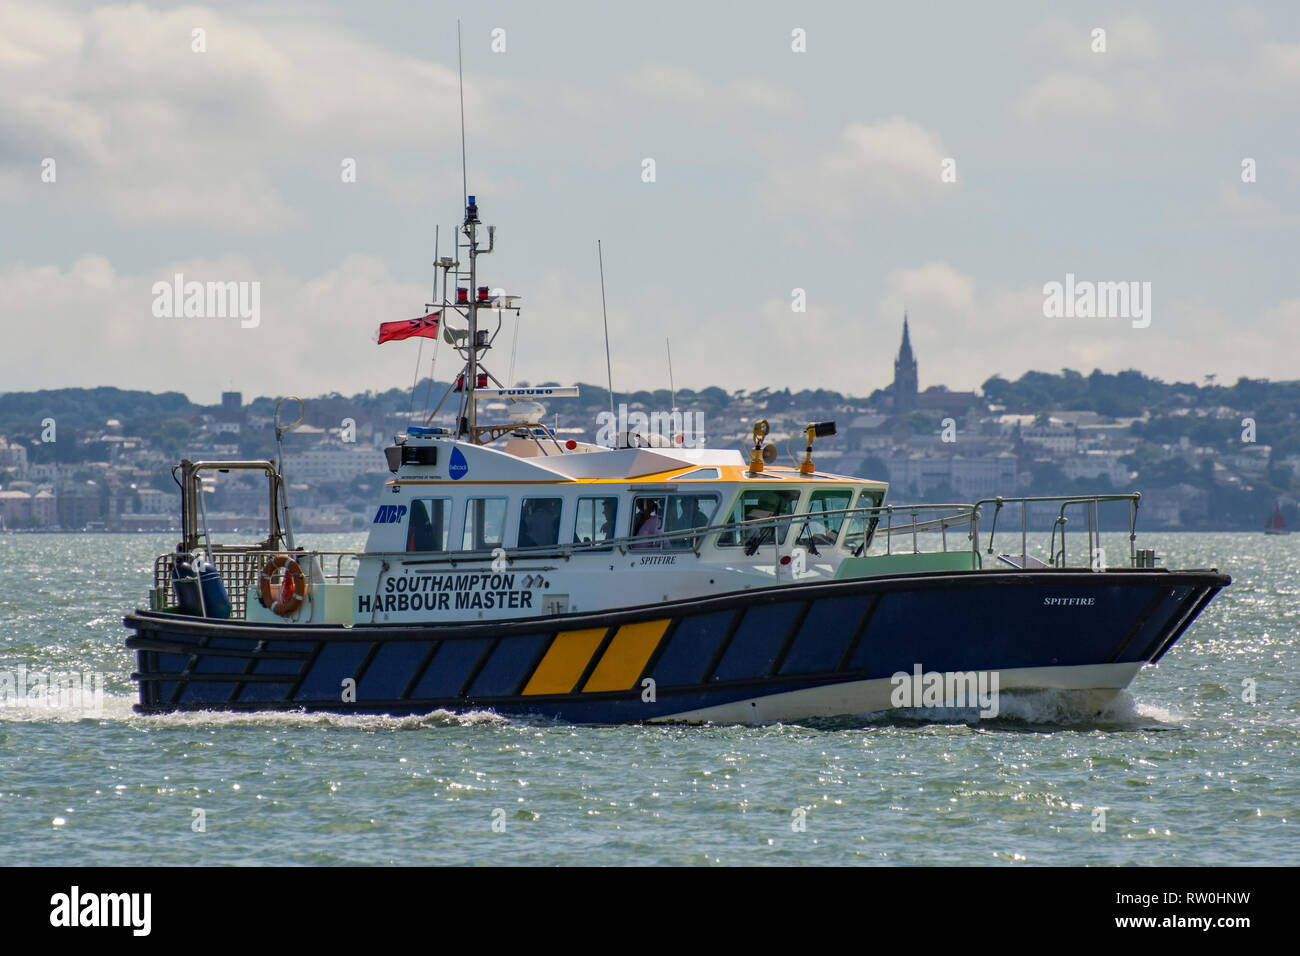 The Southampton Harbour Master launch 'Spitfire' heading for Portsmouth Harbour, UK with Ryde (Isle of Wight) in the background on 16/7/14. Stock Photo